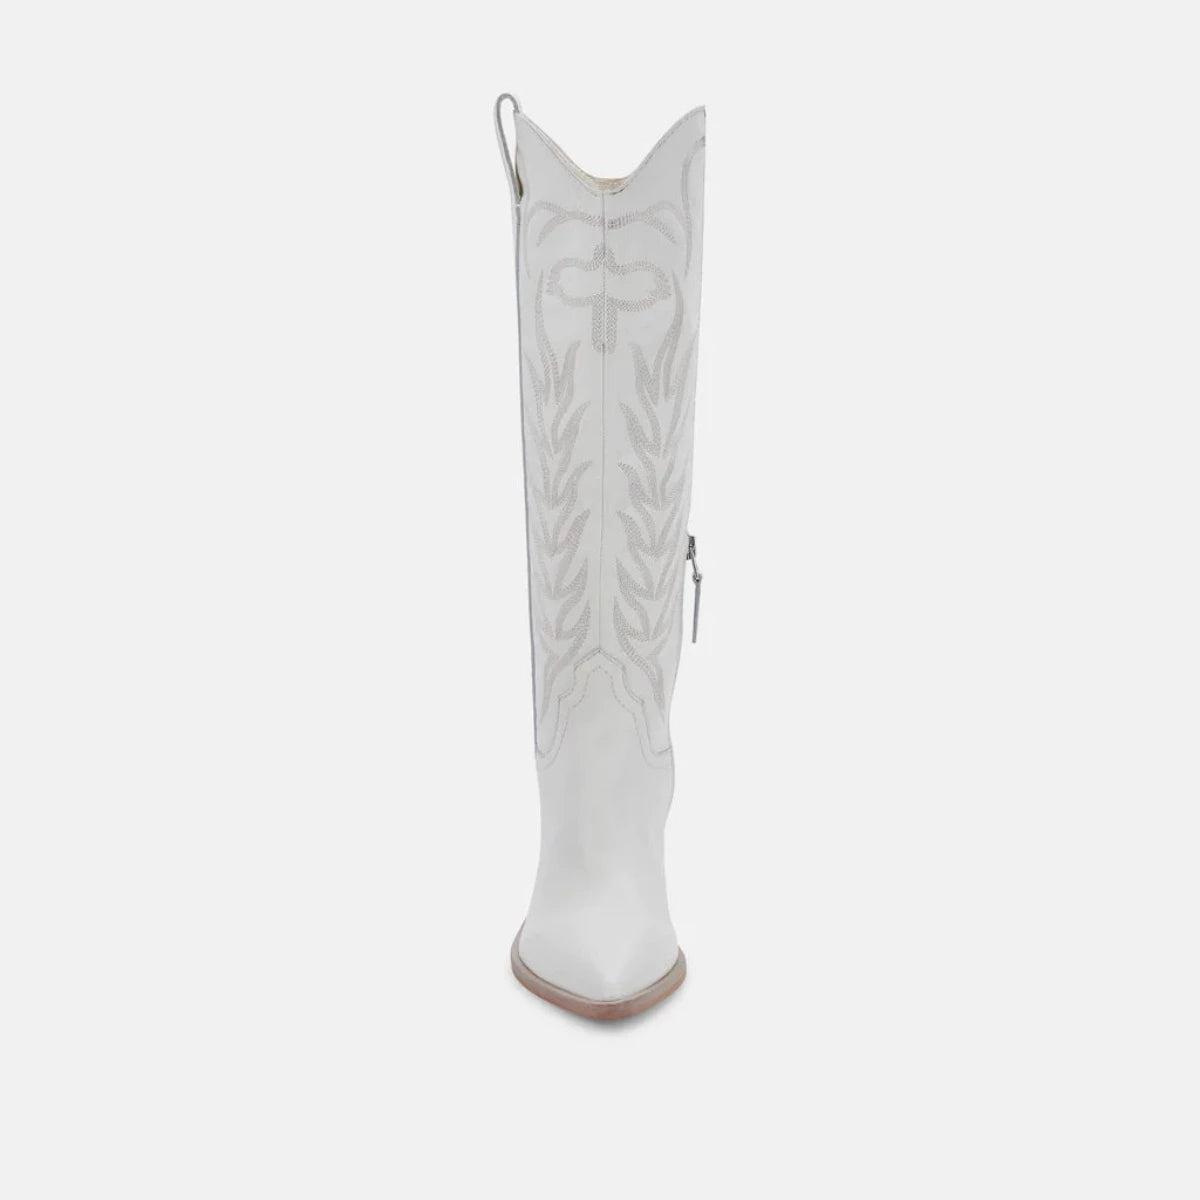 Solei boot- white embossed leather